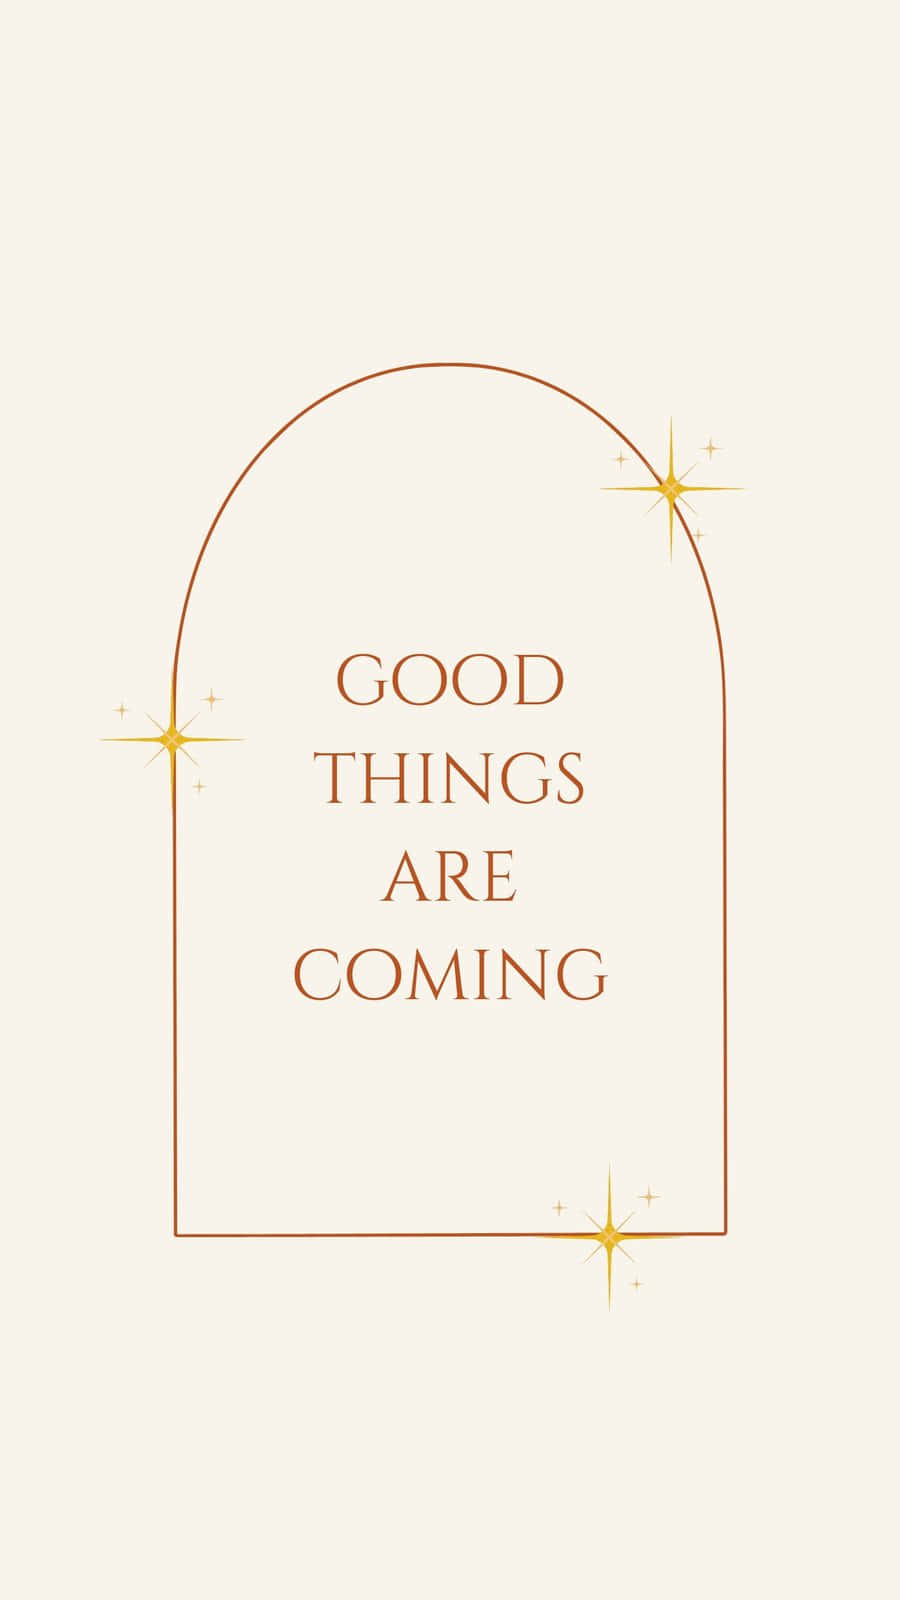 “Let go and let good things come” Wallpaper